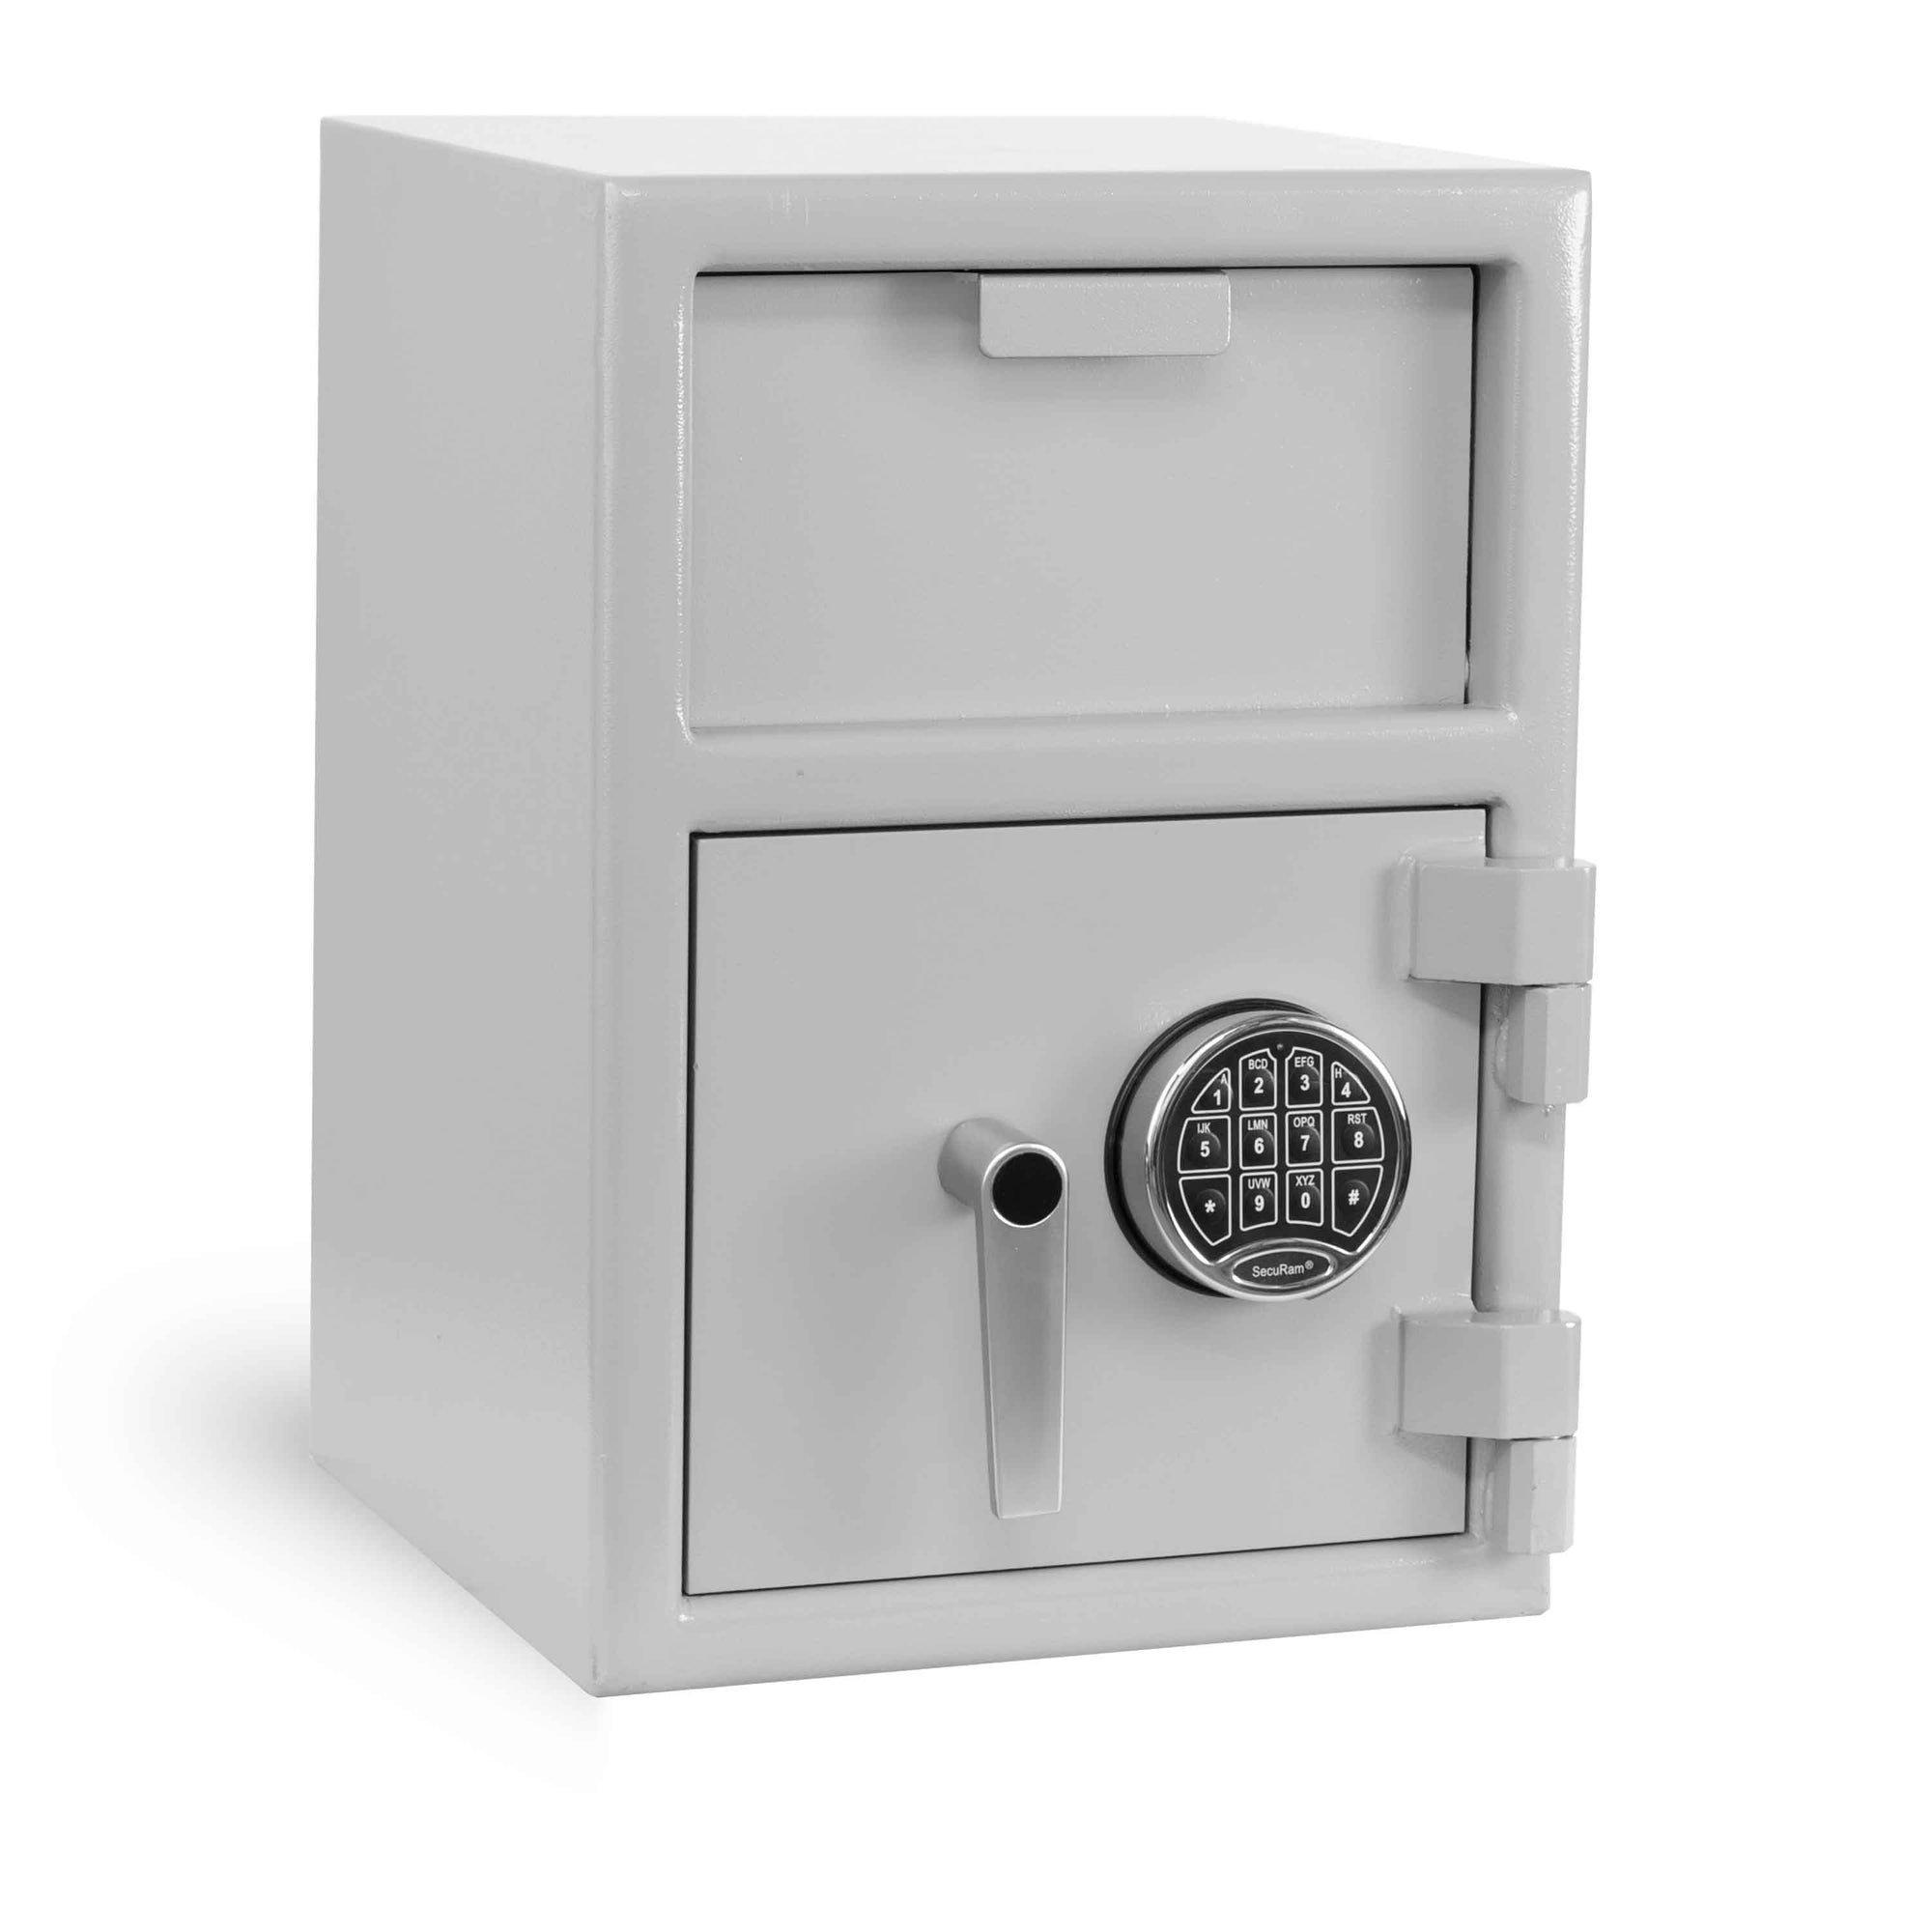 Pacific Safe HD-FL2014 Heavy Duty Front Load Depository Safe